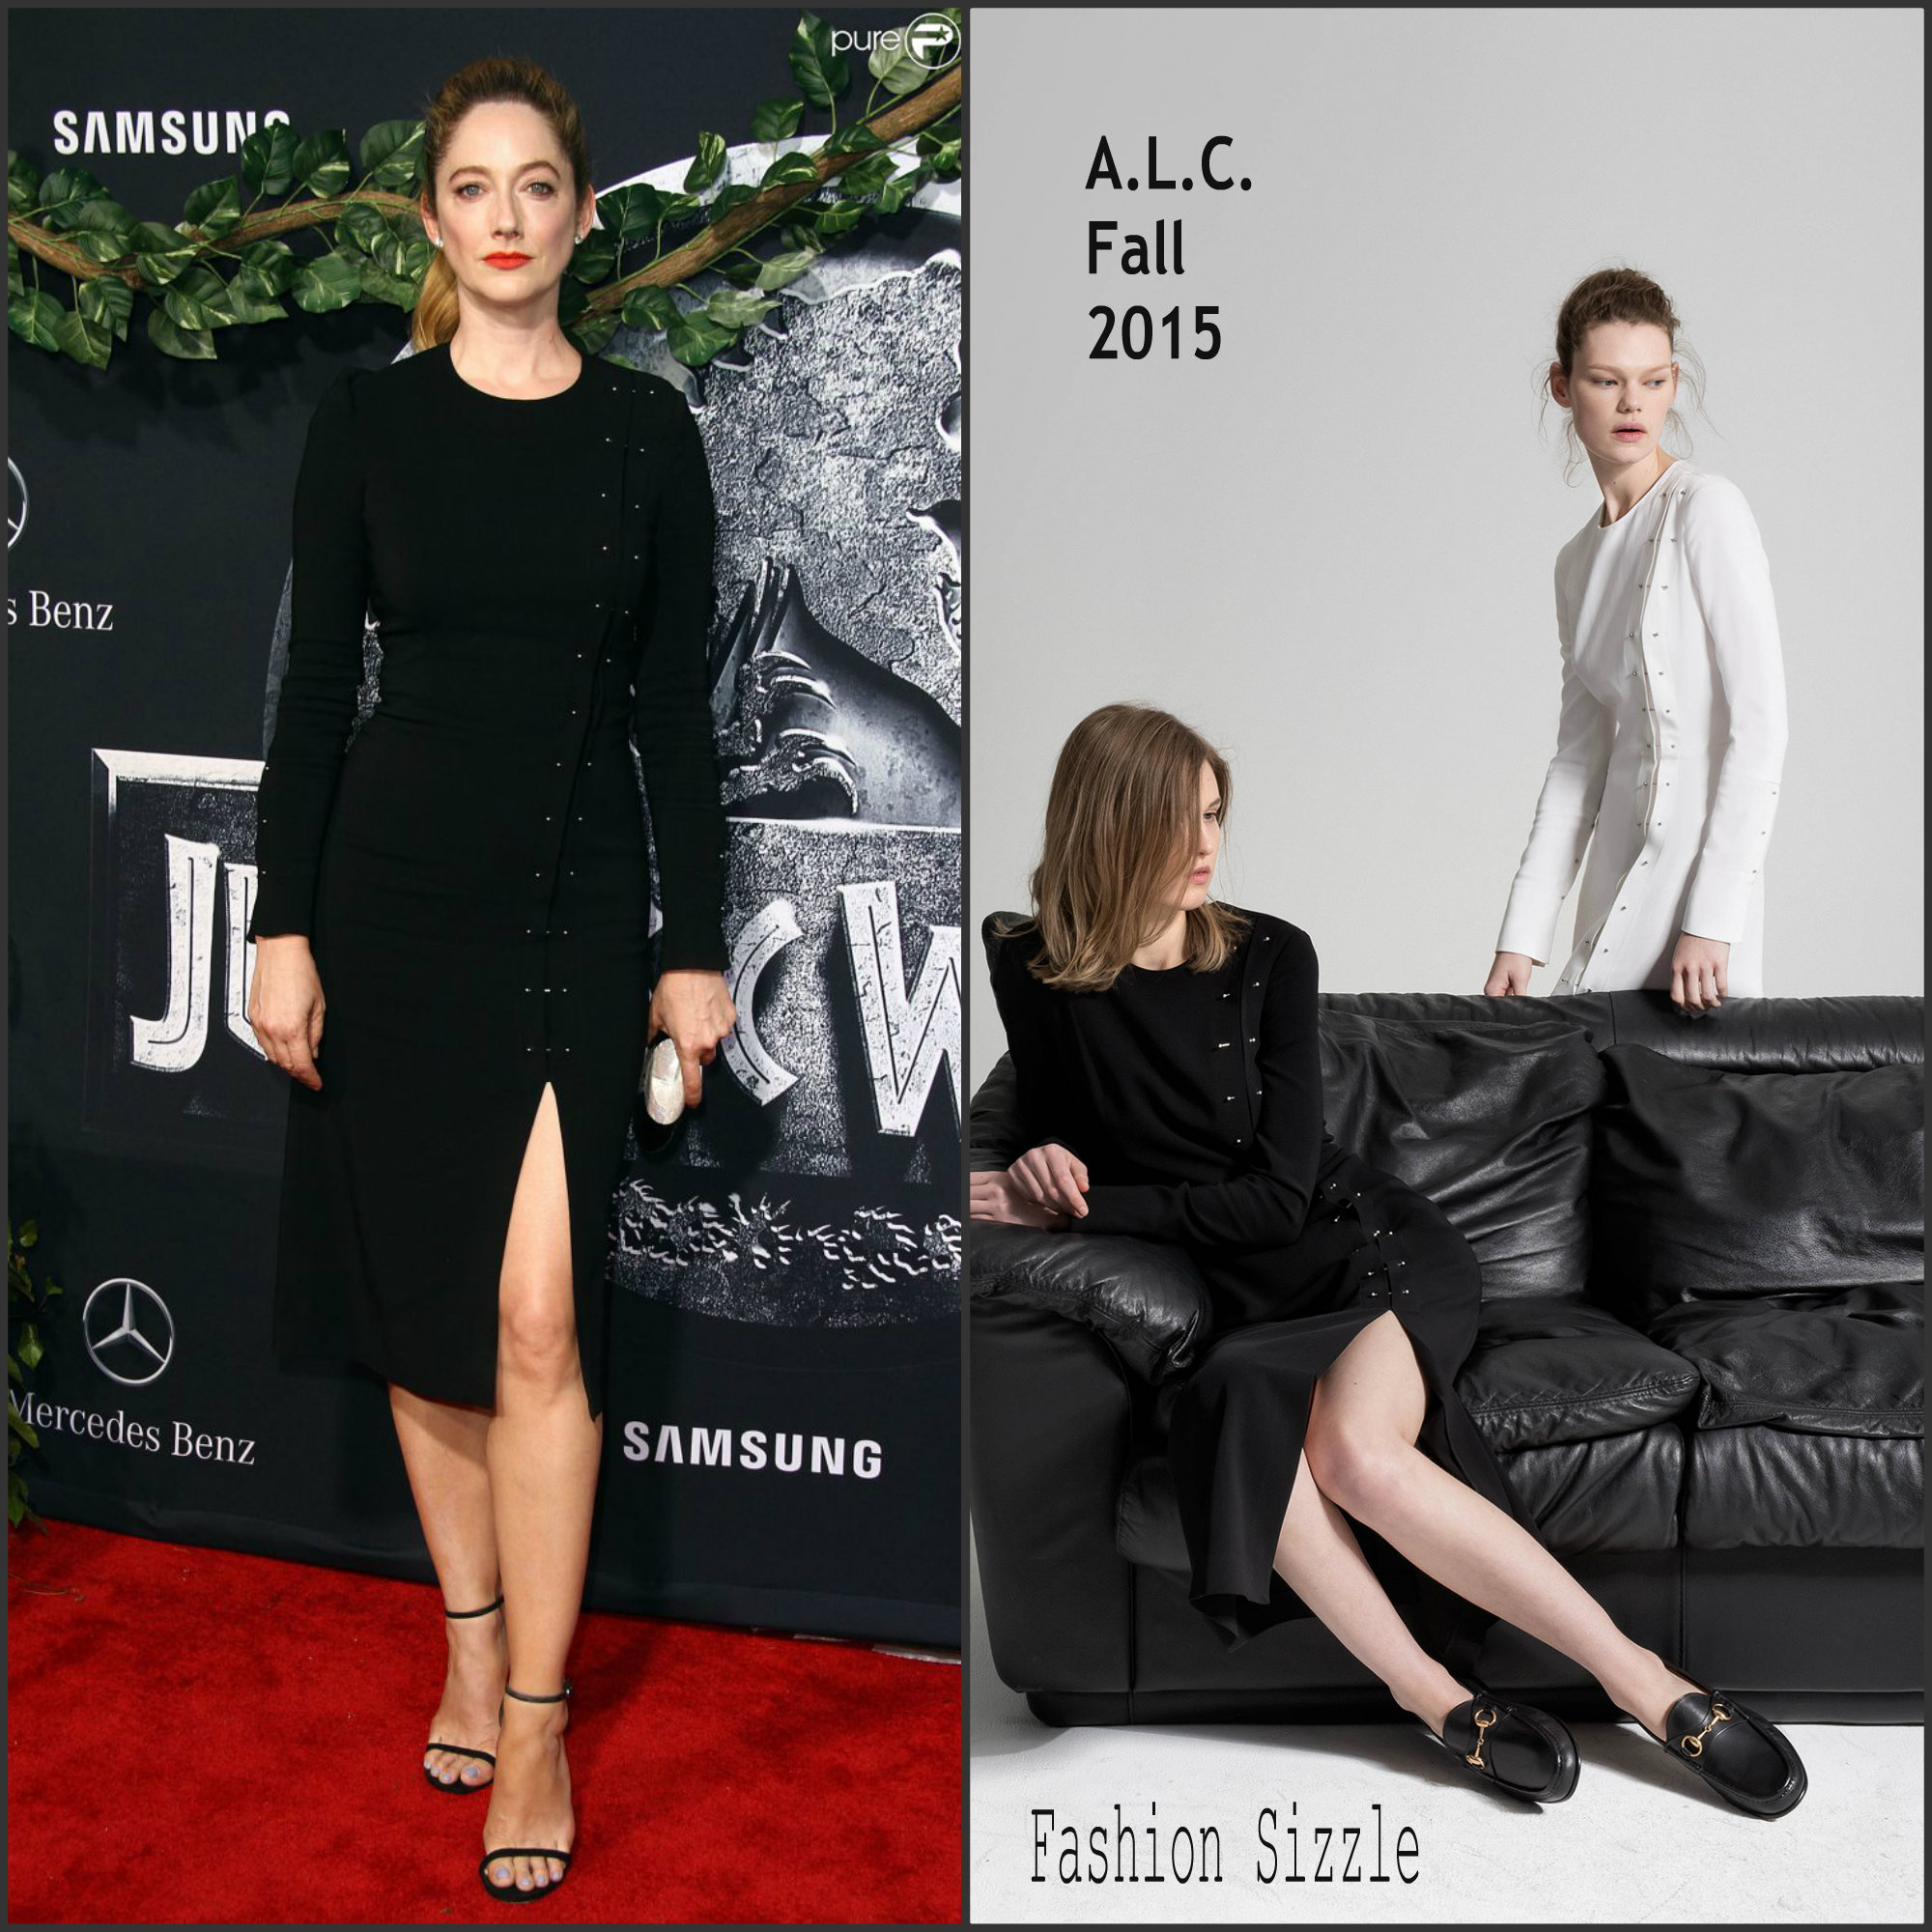 judy-greer-in-ALC-Jurassic-world-premiere-in-hollywood